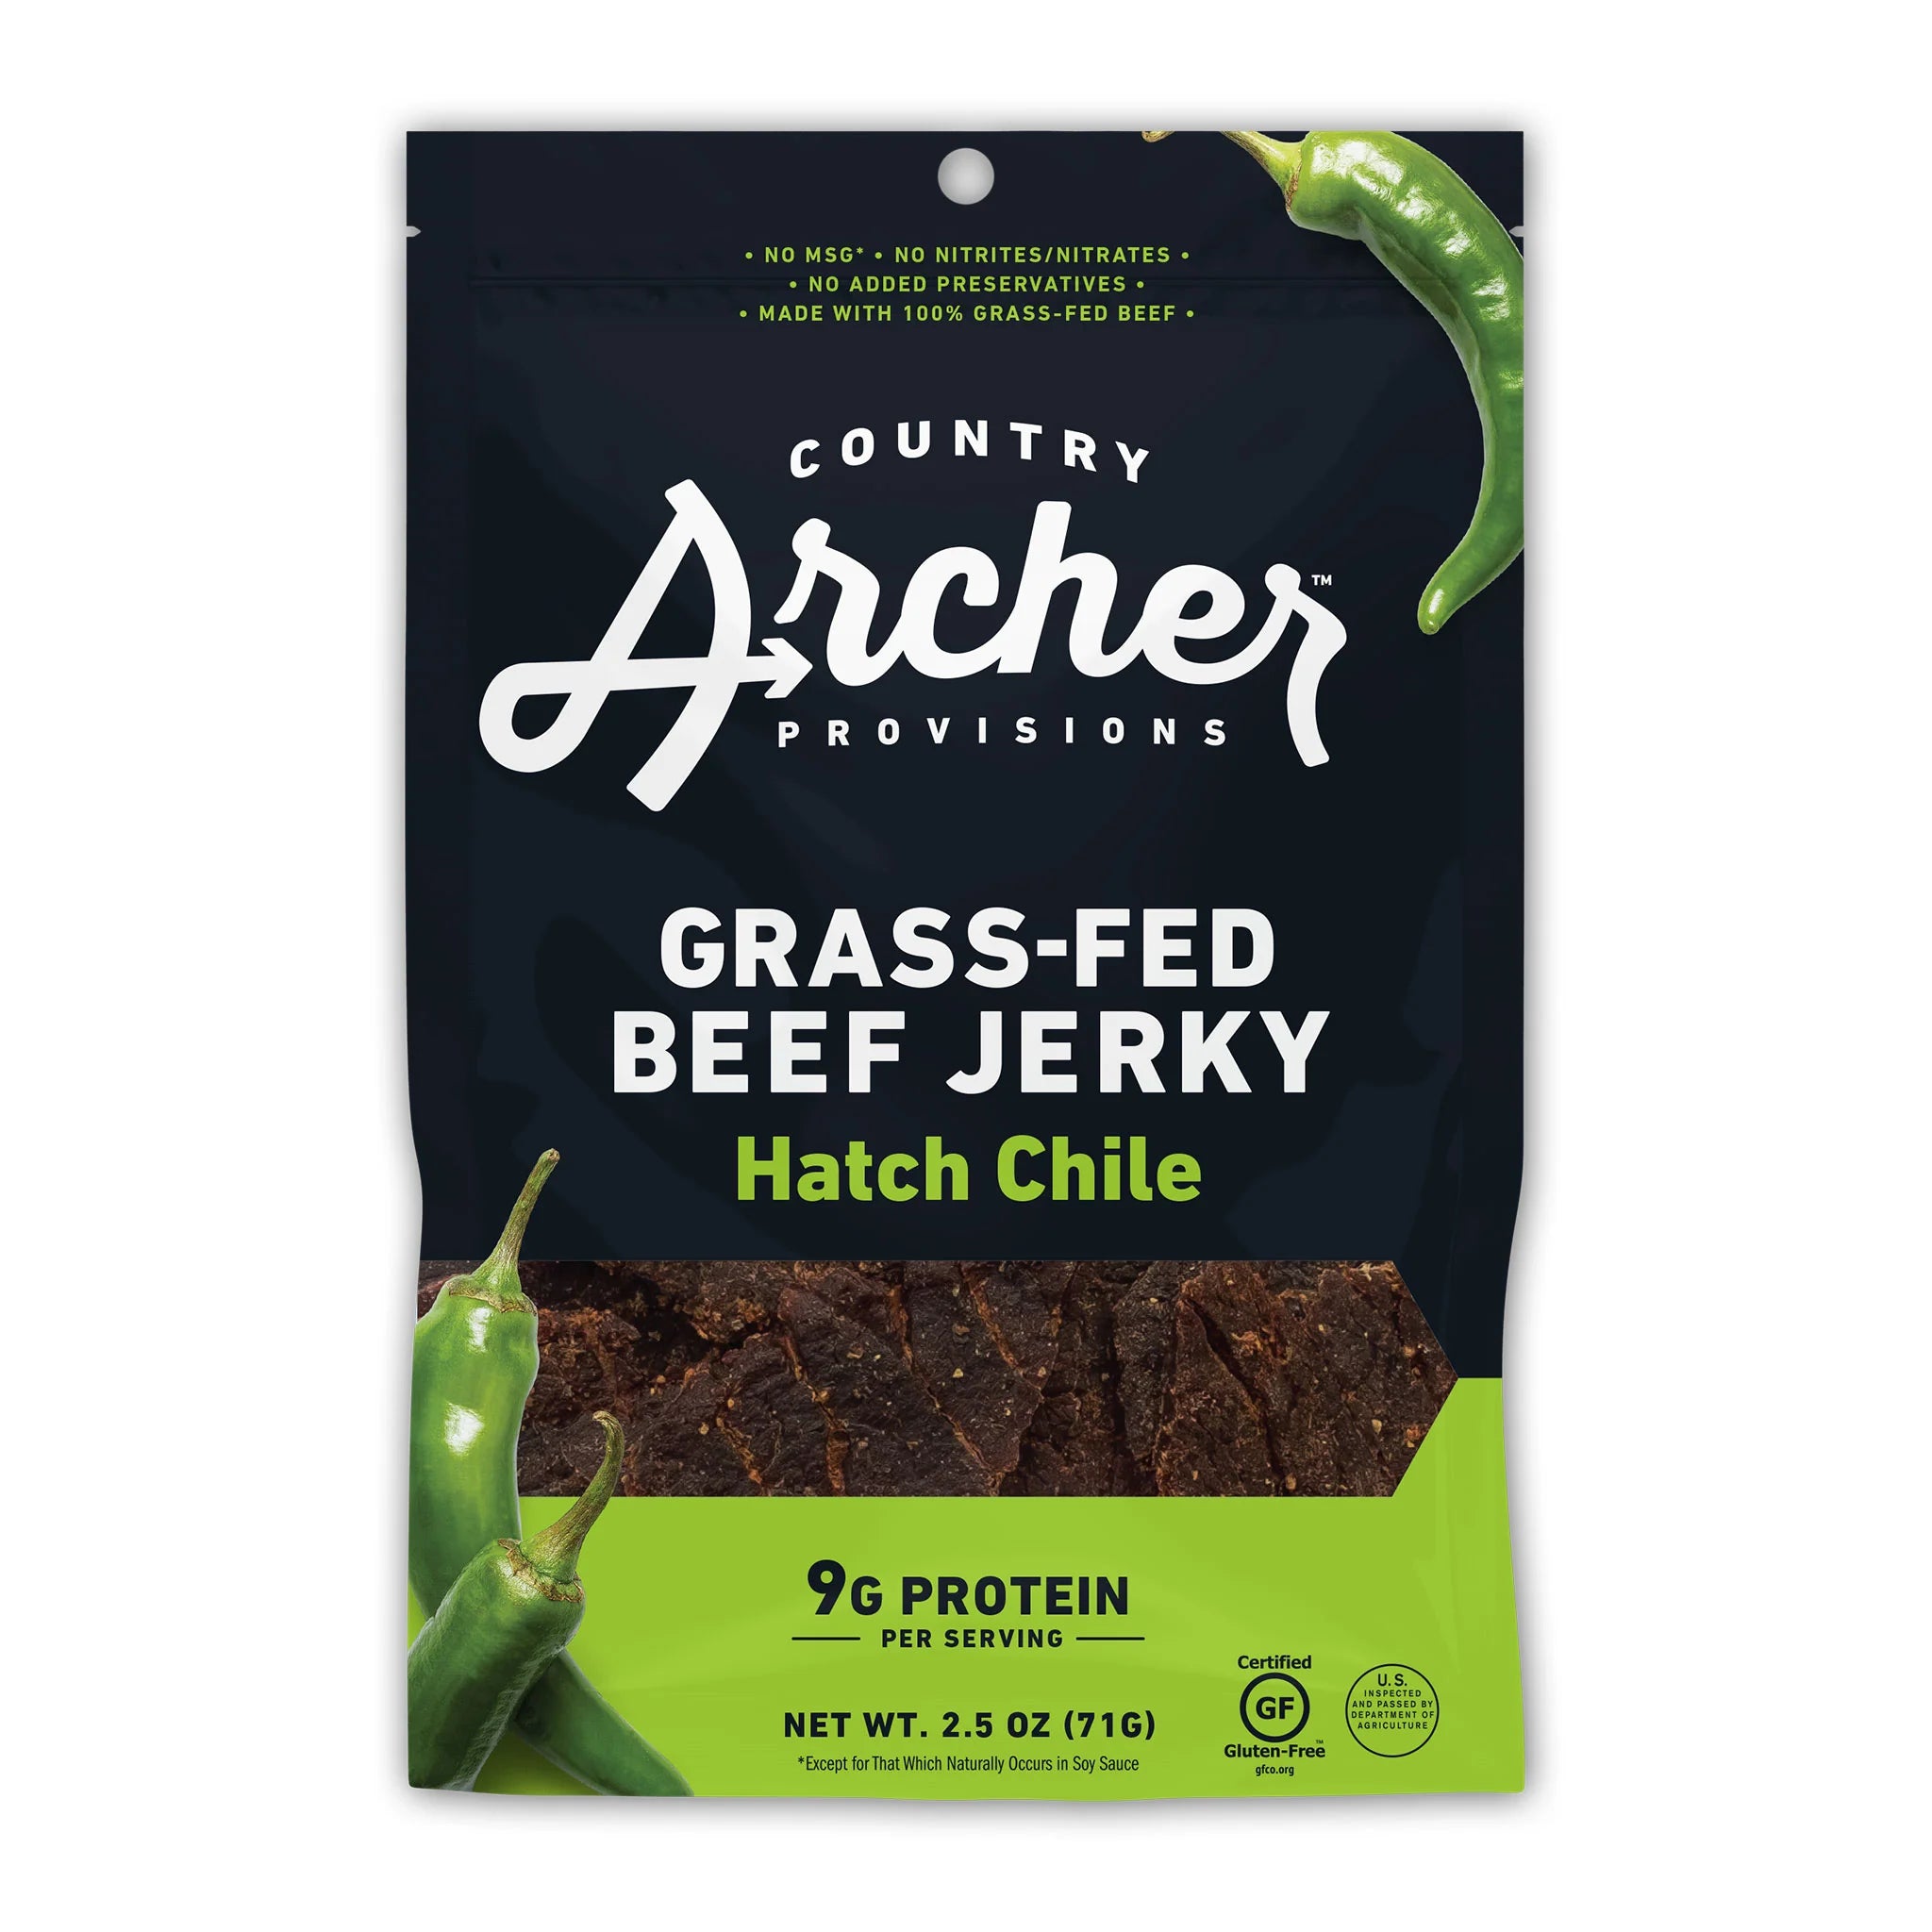 Hatch Chile Beef Jerky